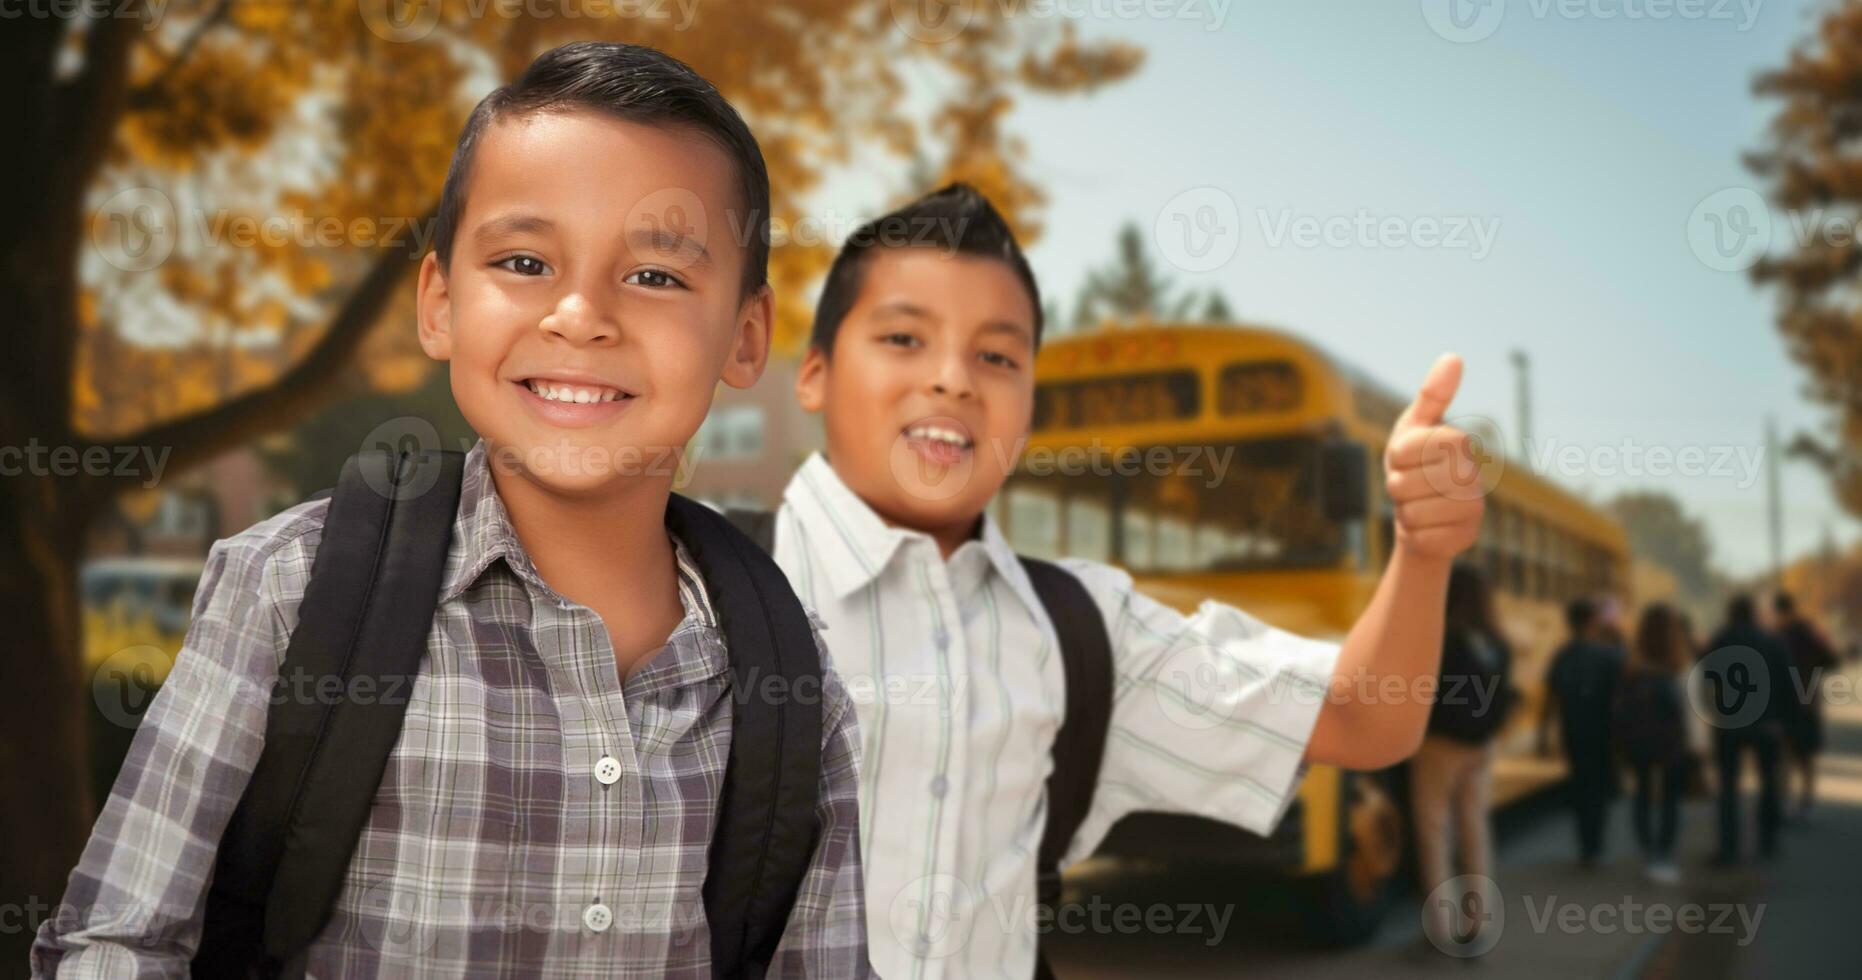 Two Happy Young Hispanic Boys Wearing Backpacks Give a Thumbs Up on Campus Near a School Bus photo